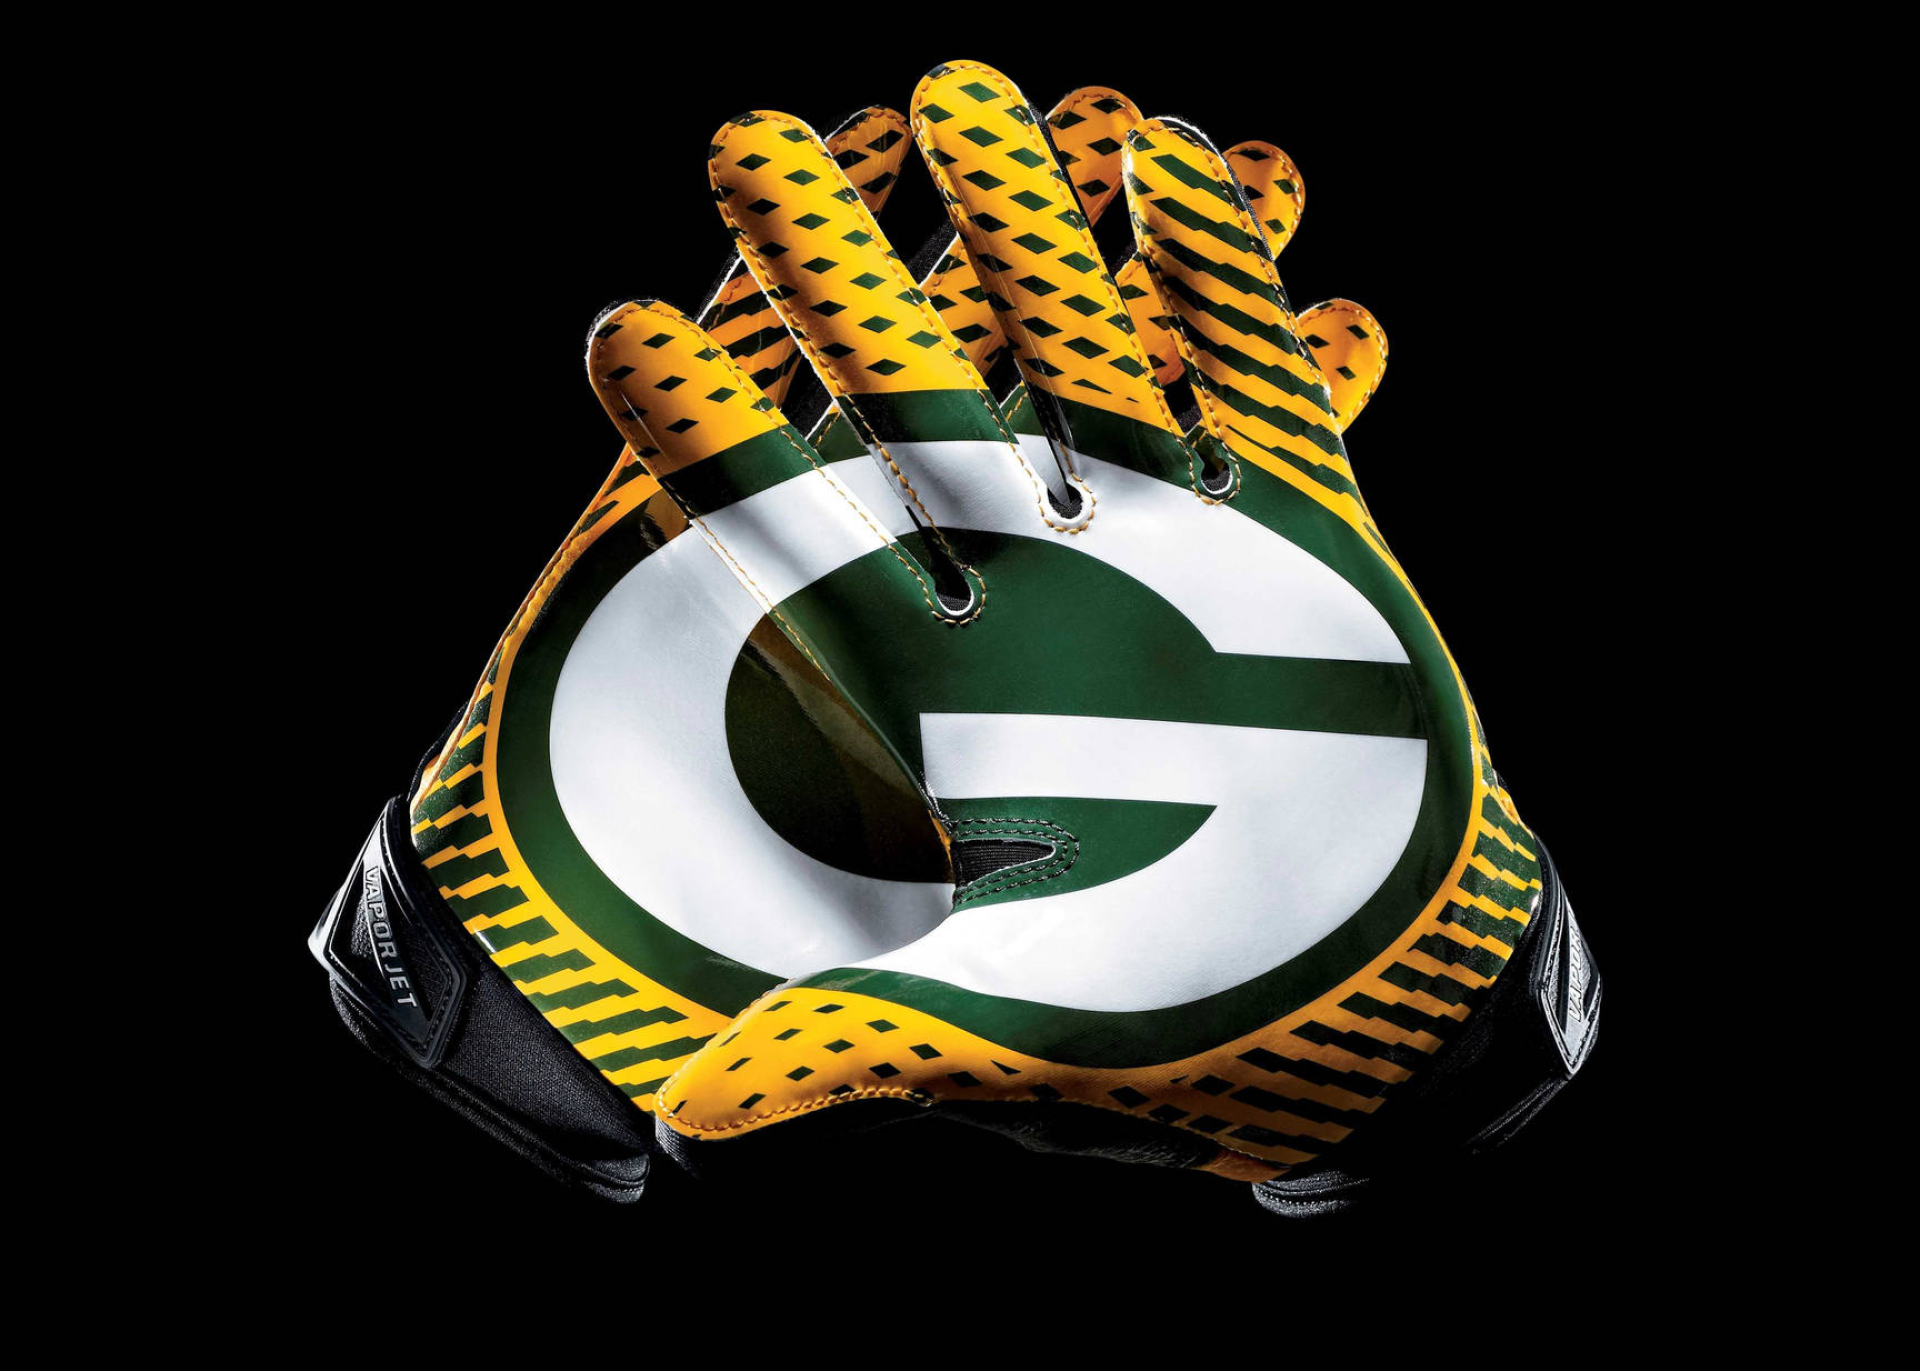 1920x1371 Download Green Bay Packers Gloves Wallpaper